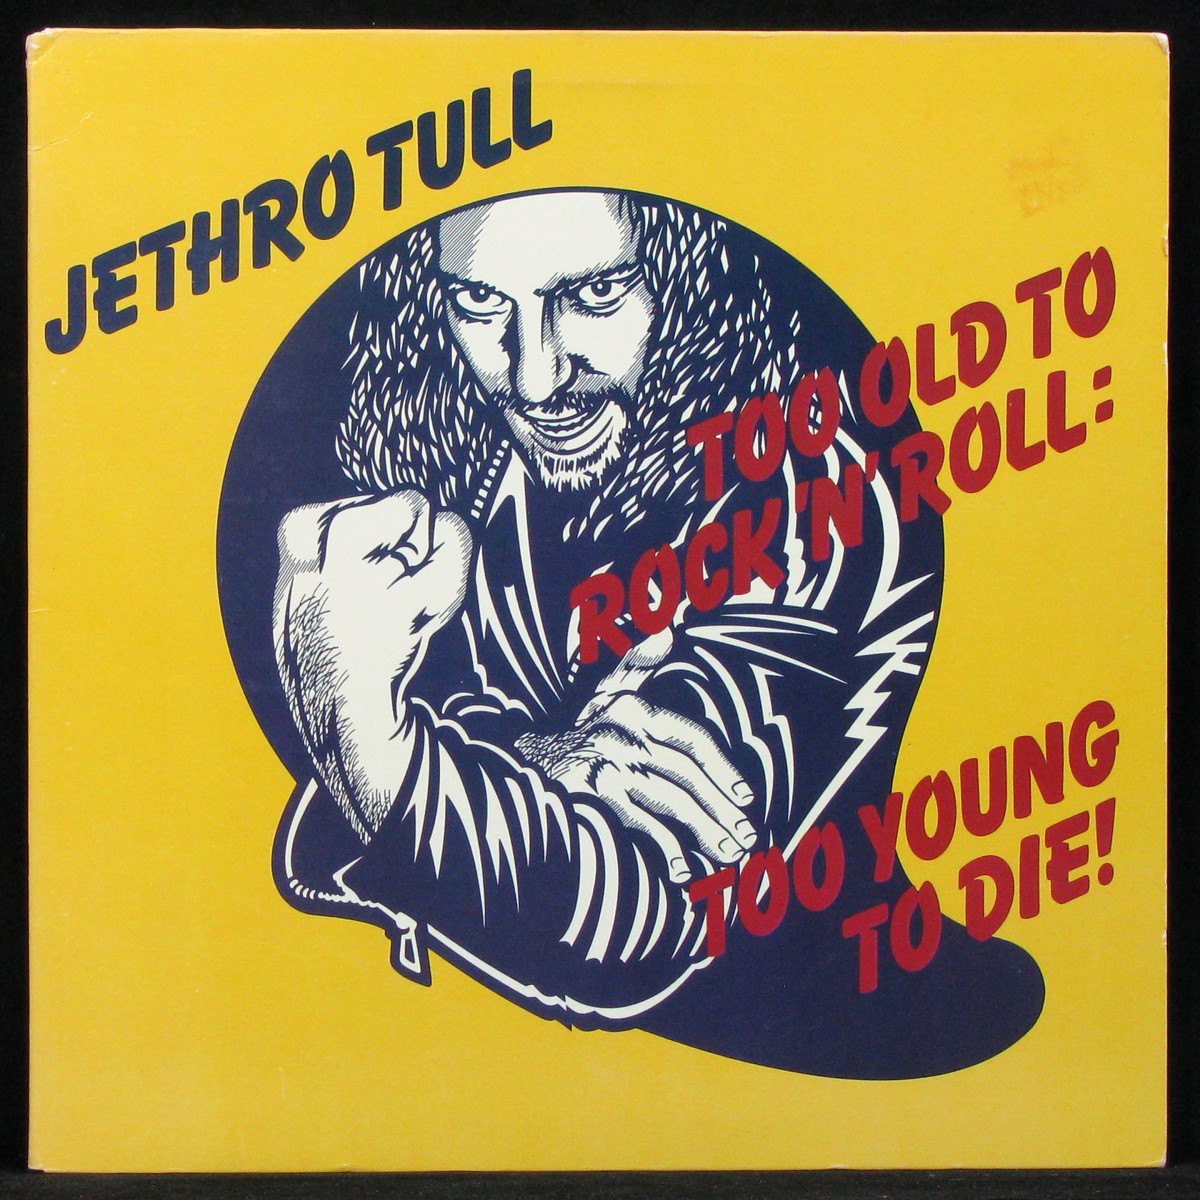 Too Old To Rock 'N' Roll: Too Young To Die!